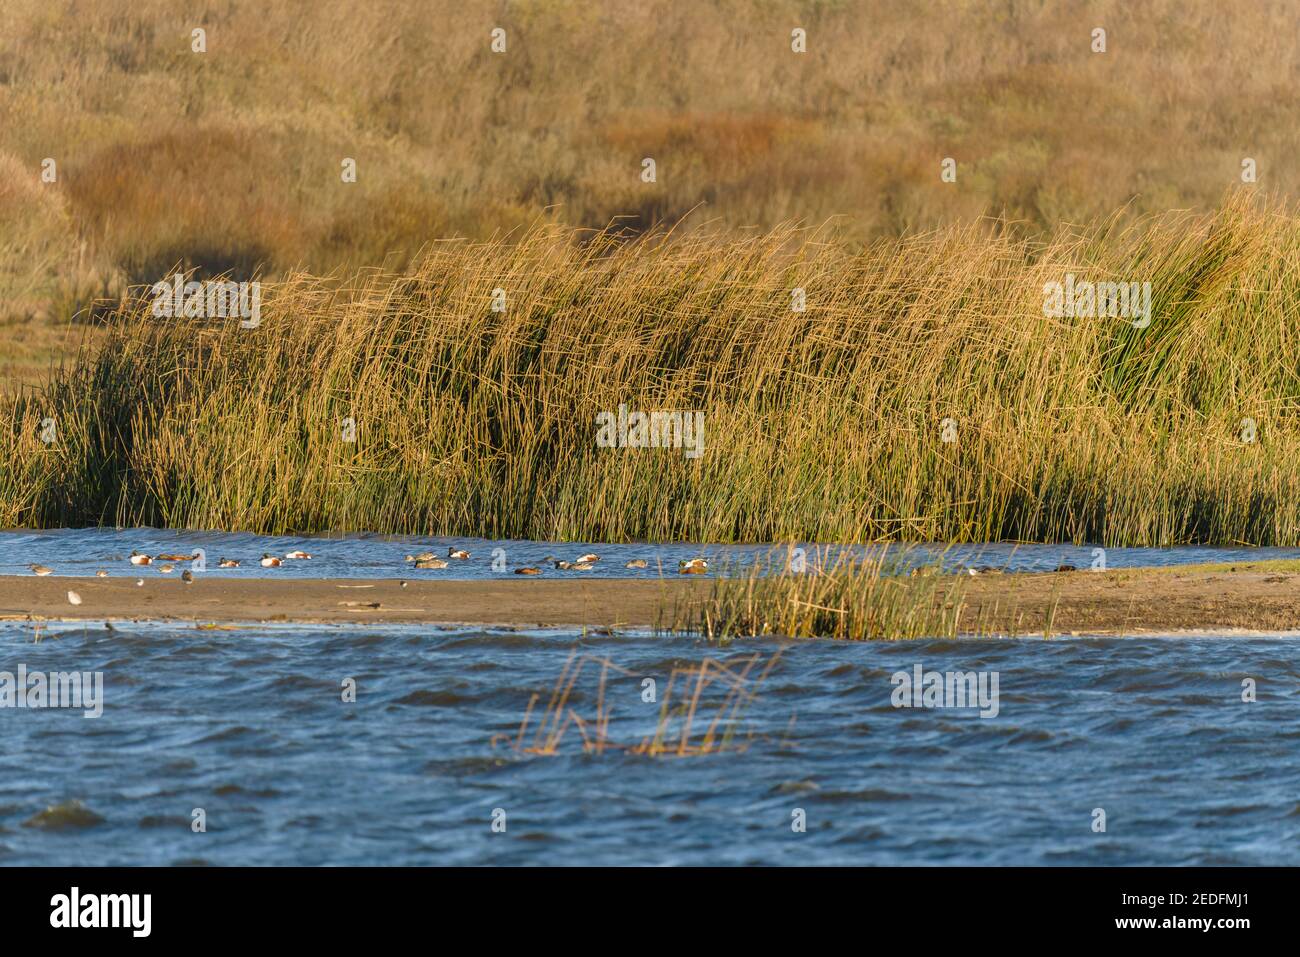 Blue river, marshland, and silhouette of floating birds in windy overcast day, California Central Coast Stock Photo